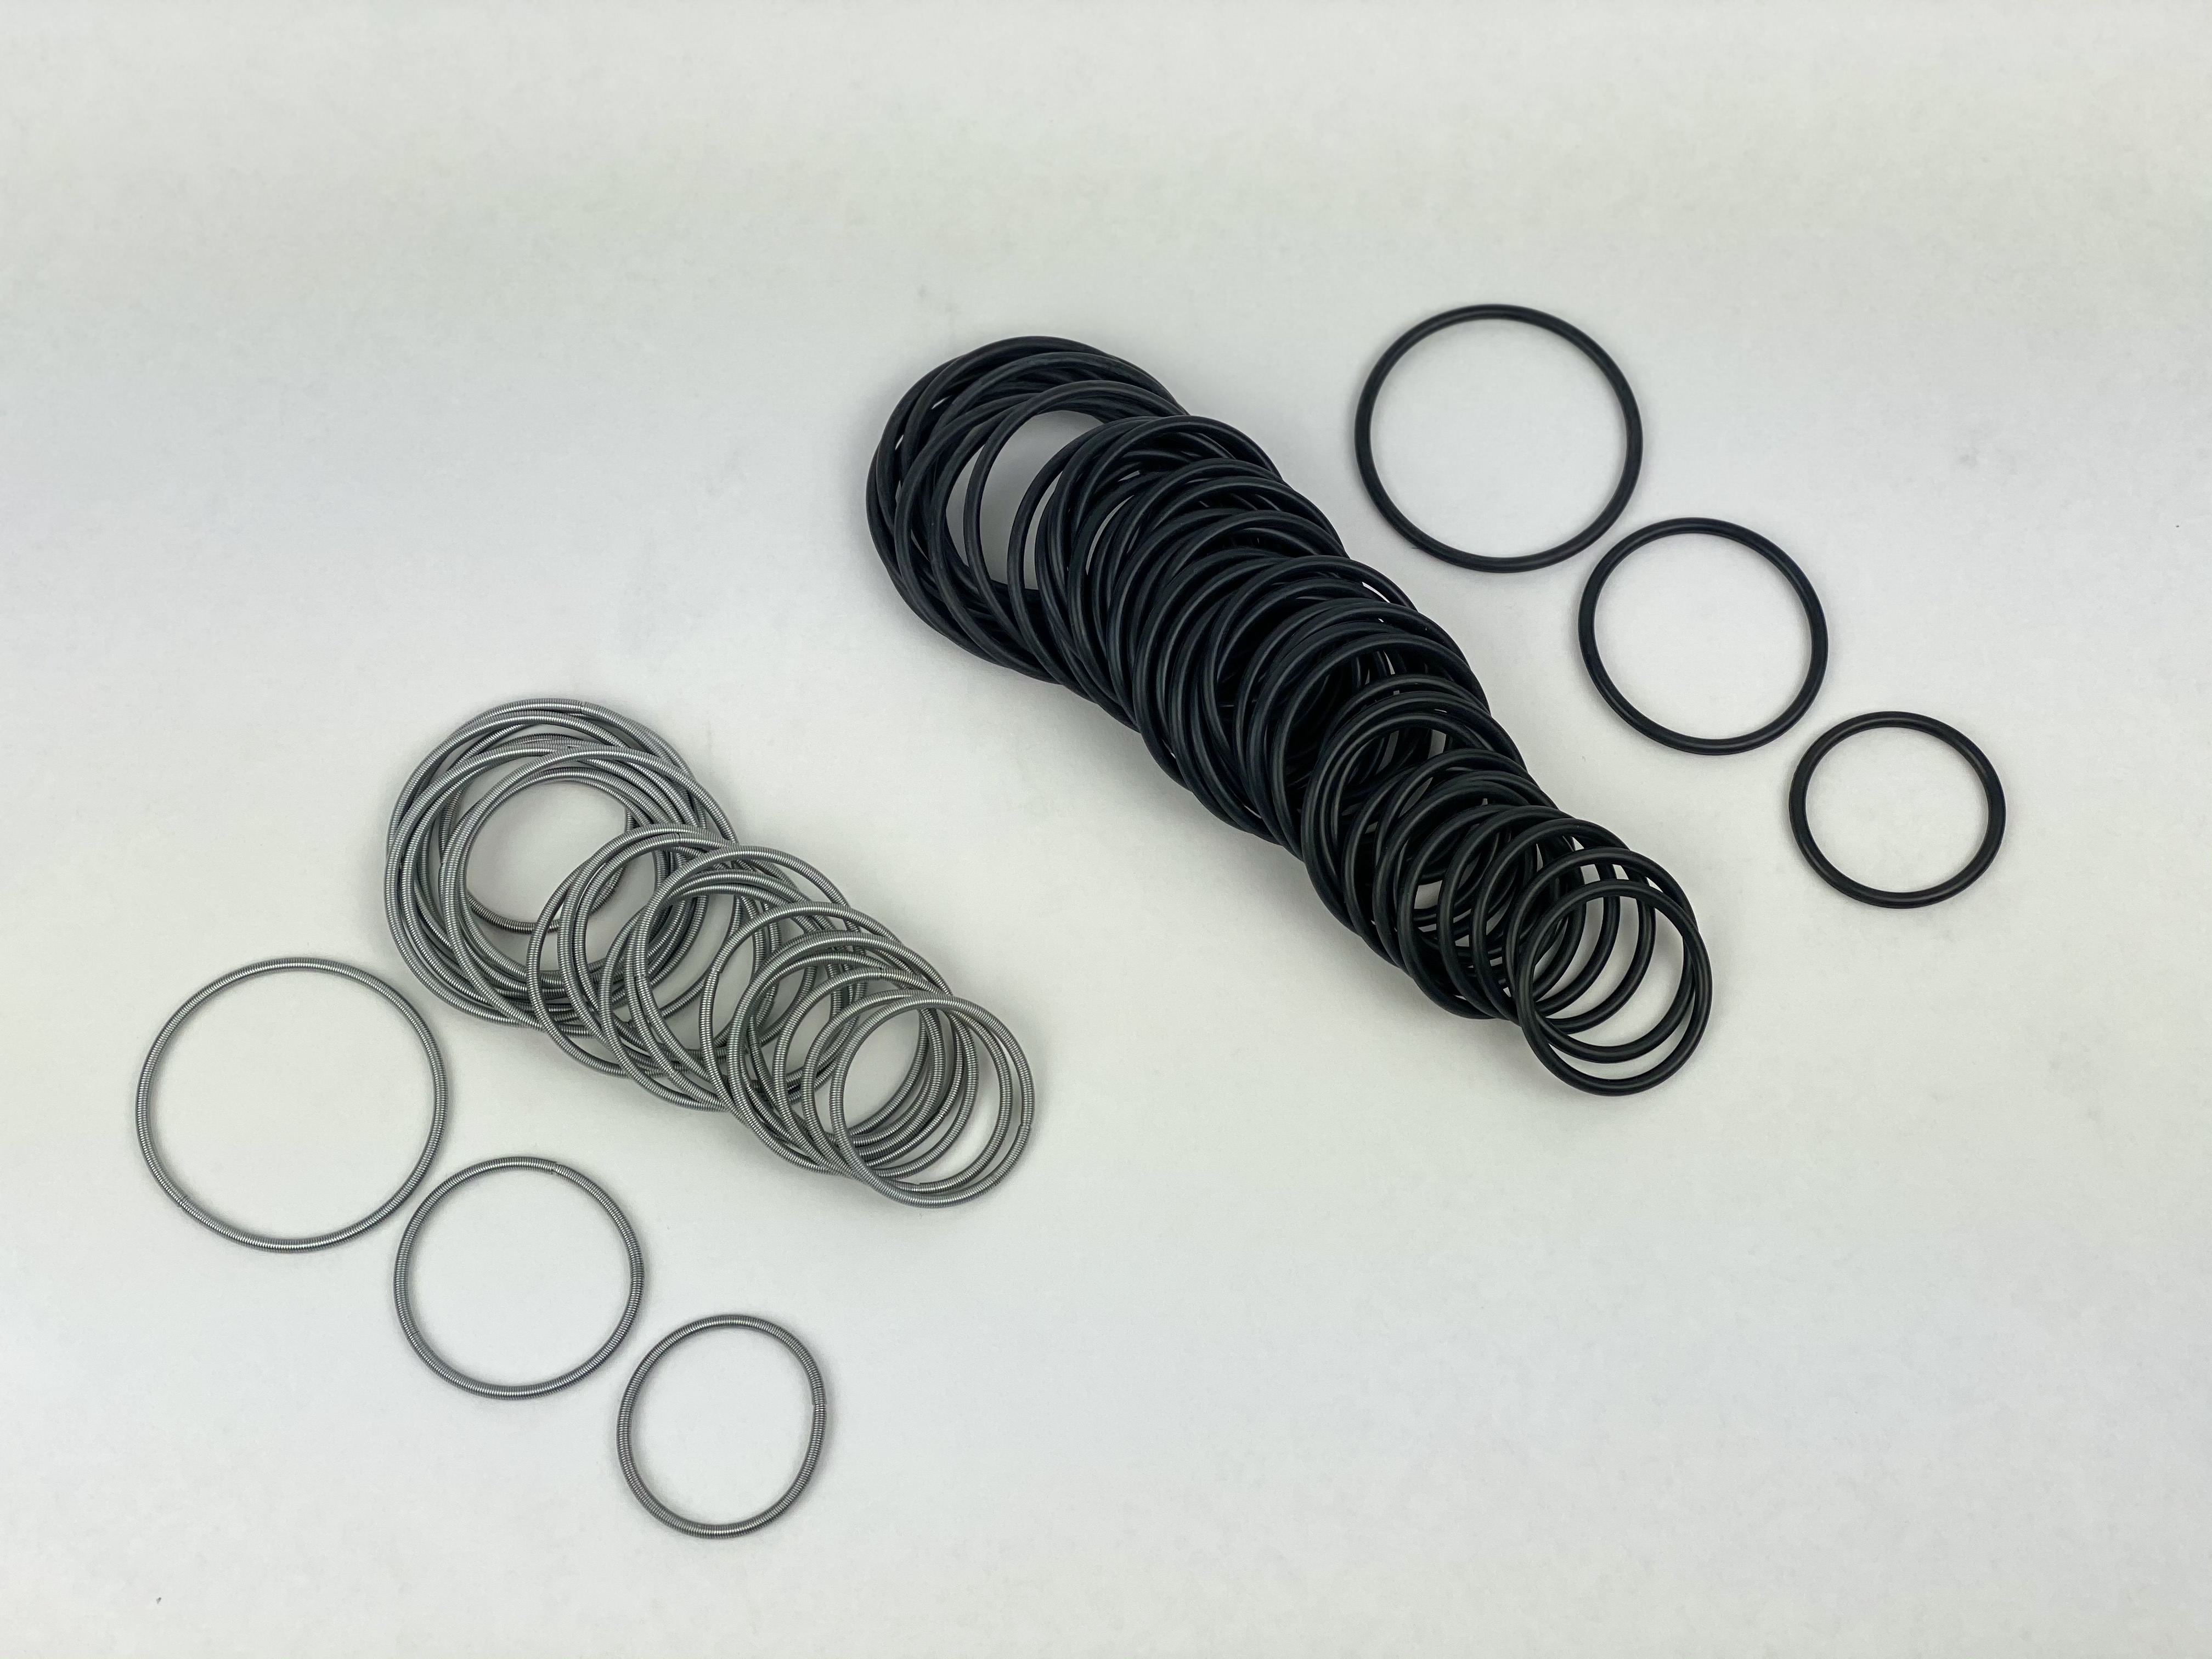 O-Ring Kits for BendPak® Machines - PKSR25 AND PKRR50